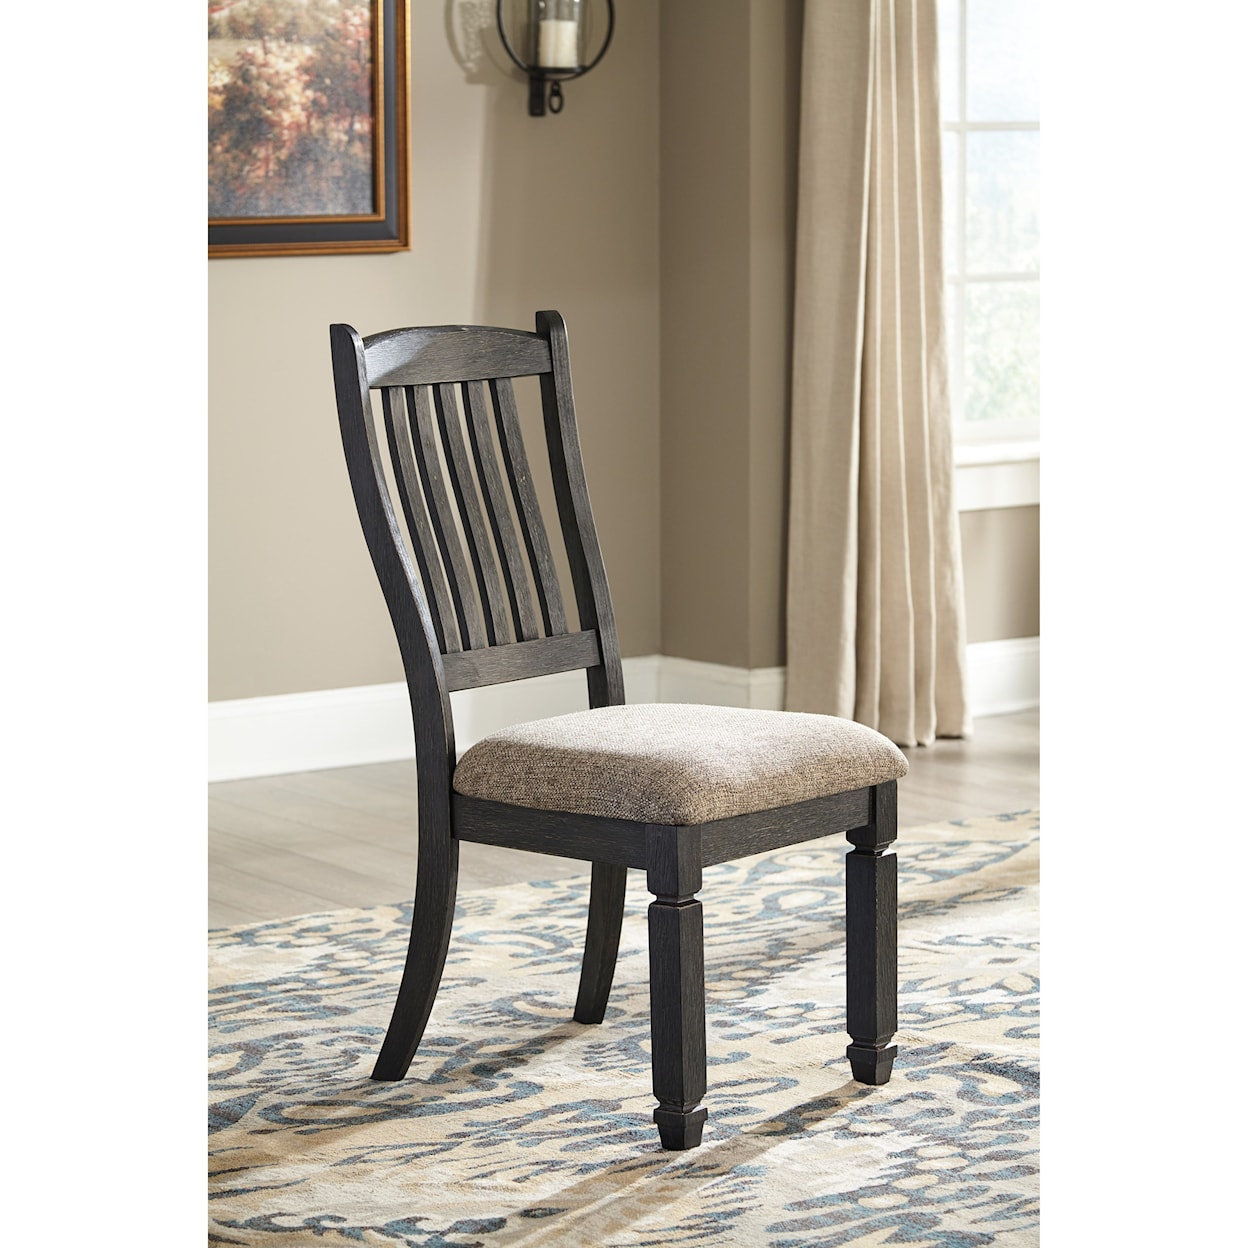 Signature Design by Ashley Tyler Creek 6-Piece Table and Chair Set